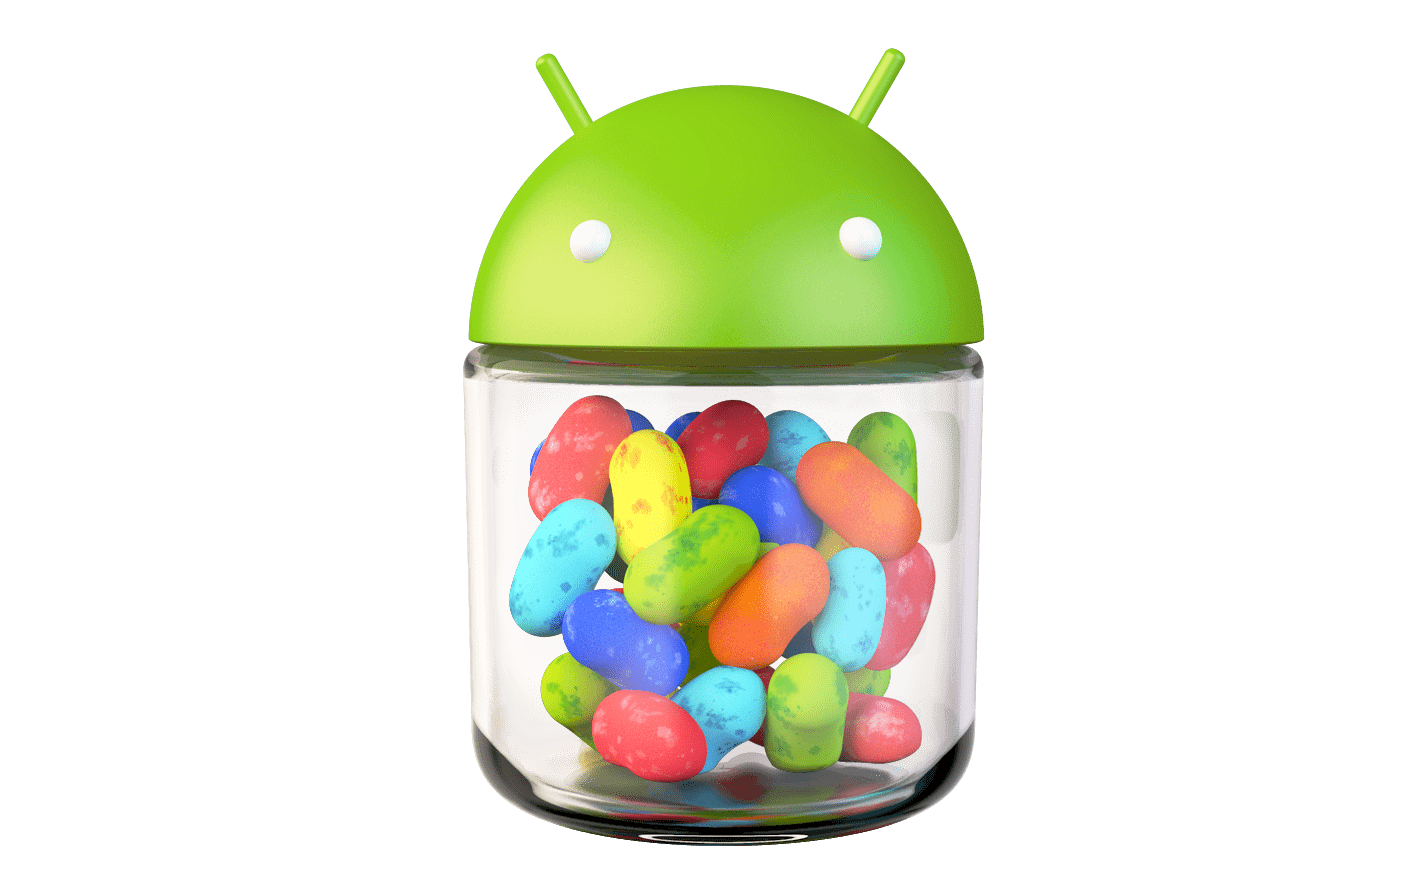 Jelly android. Android 4.1-4.3 Jelly Bean. Андроид Джелли Бин. Андроид Jelly Bean. Jelly Bean 4.1.2.